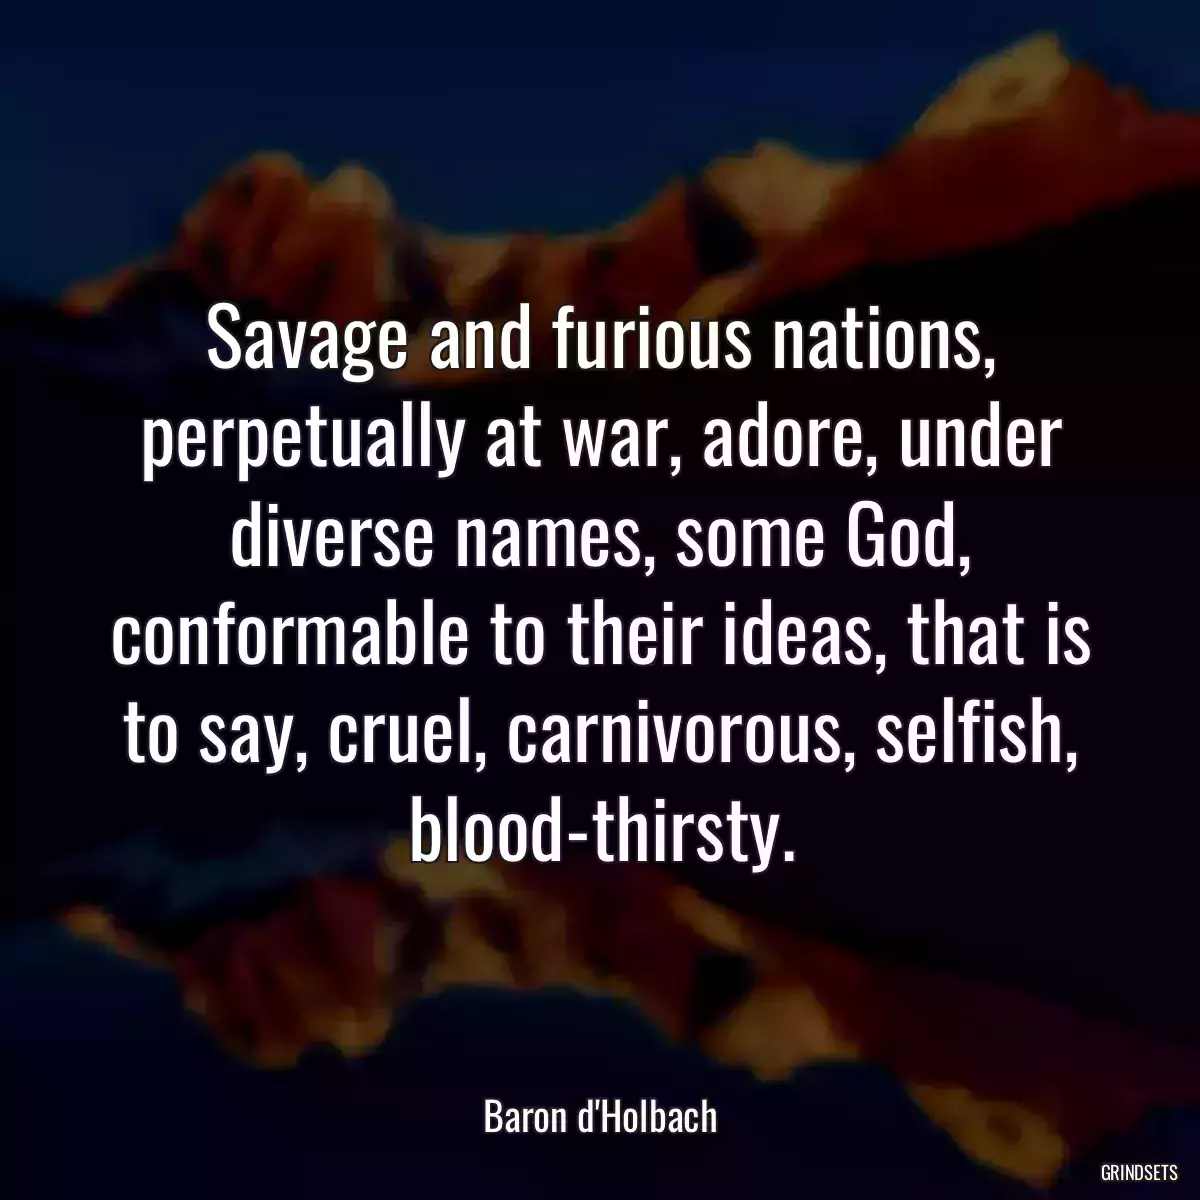 Savage and furious nations, perpetually at war, adore, under diverse names, some God, conformable to their ideas, that is to say, cruel, carnivorous, selfish, blood-thirsty.